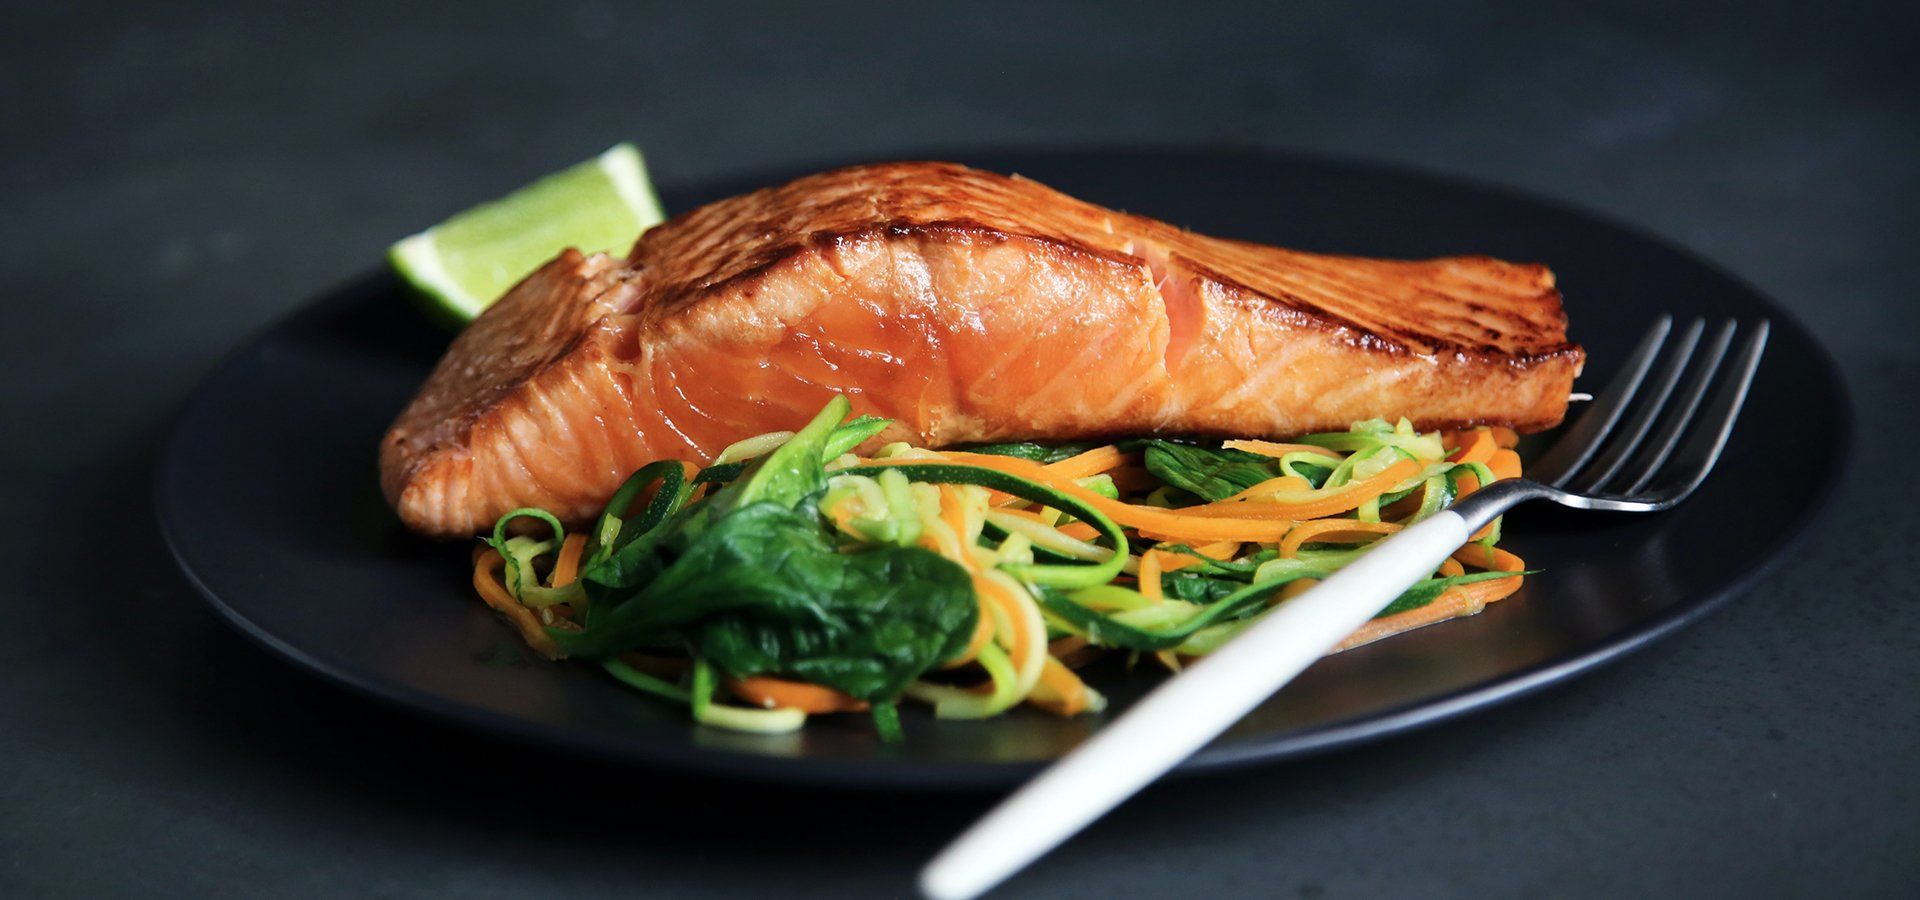 Healthy dinner with Salmon and vegetables